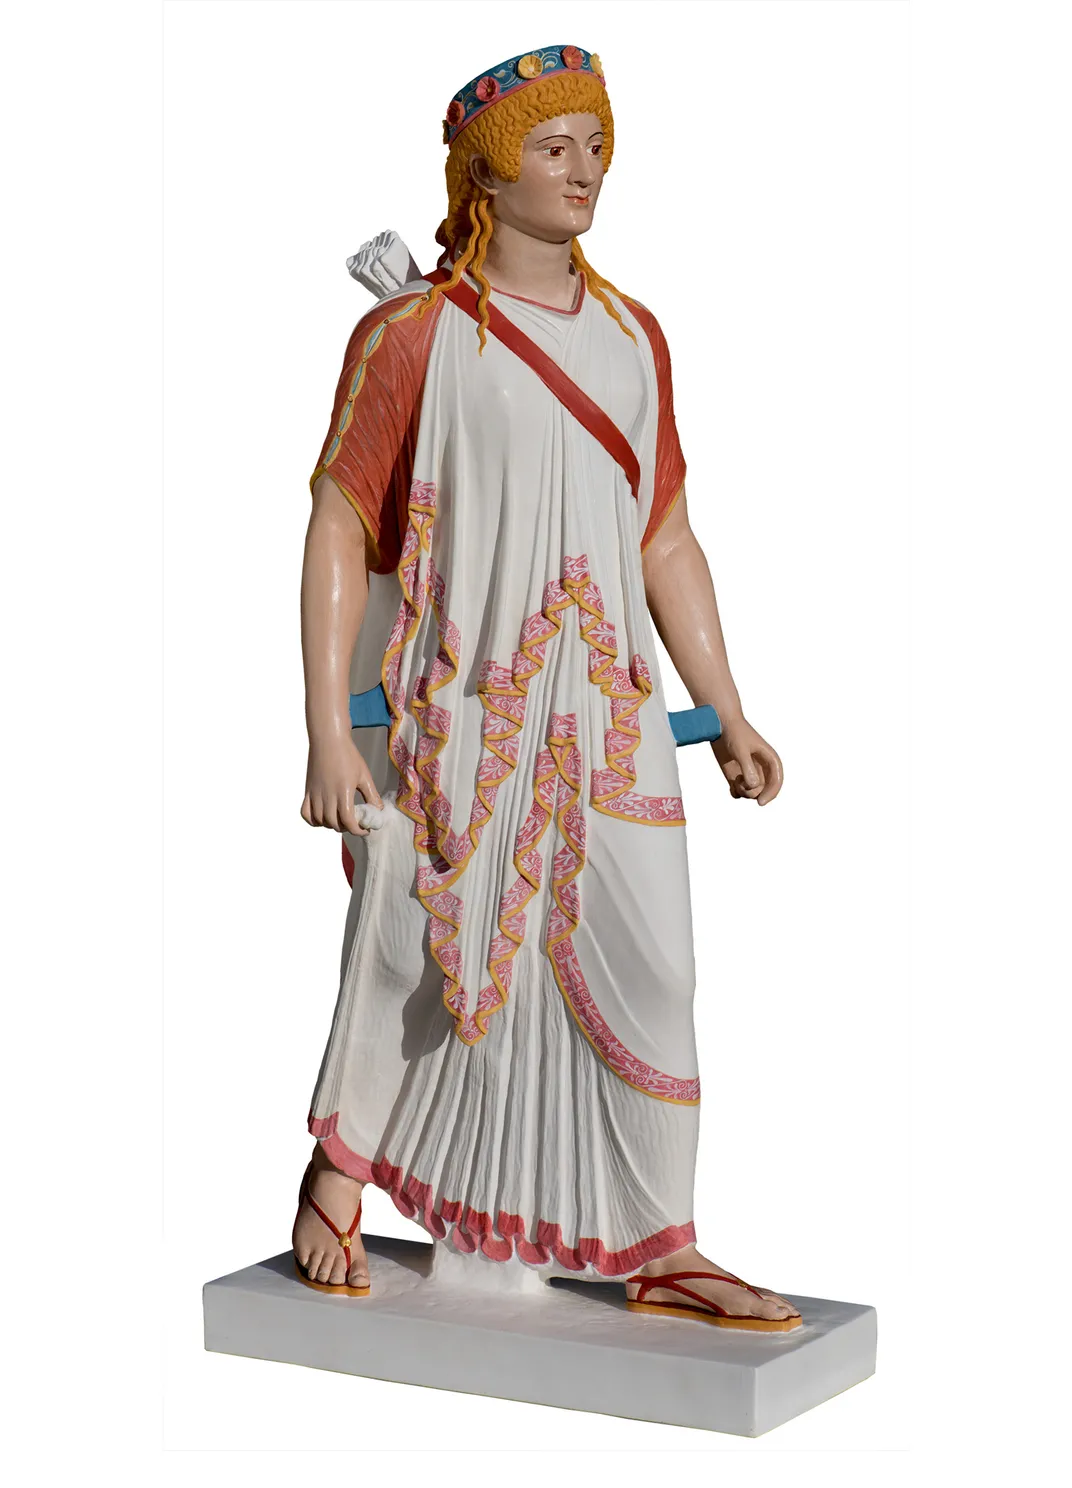 Reconstruction of a marble statue of the goddess Artemis from Pompeii, Variant A, 2010, by Vinzenz Brinkmann and Ulrike Koch-Brinkmann